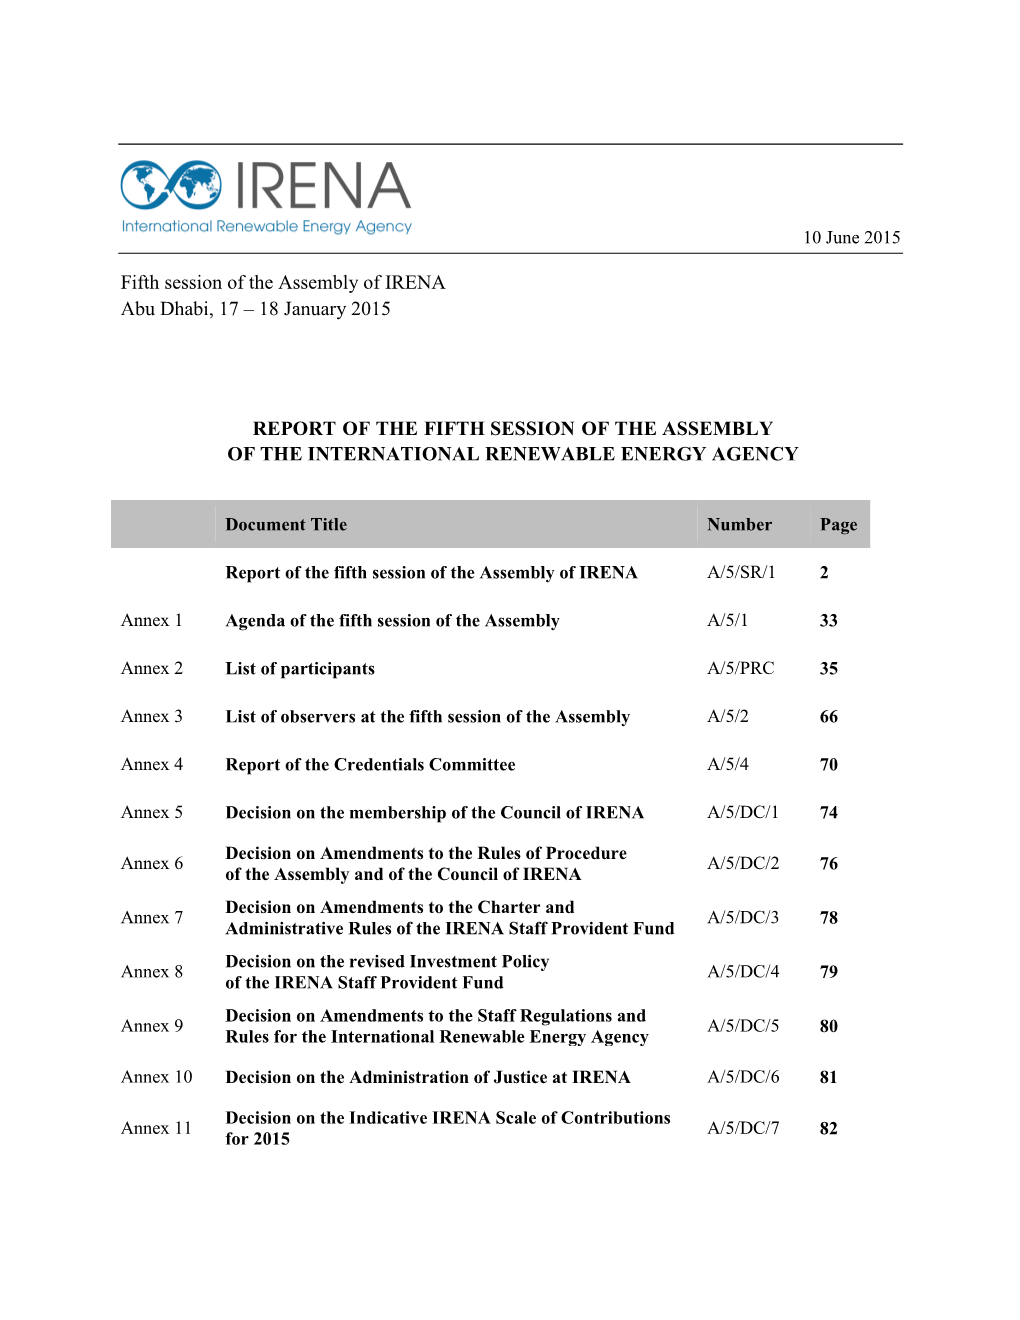 Fifth Session of the Assembly of IRENA Abu Dhabi, 17 – 18 January 2015